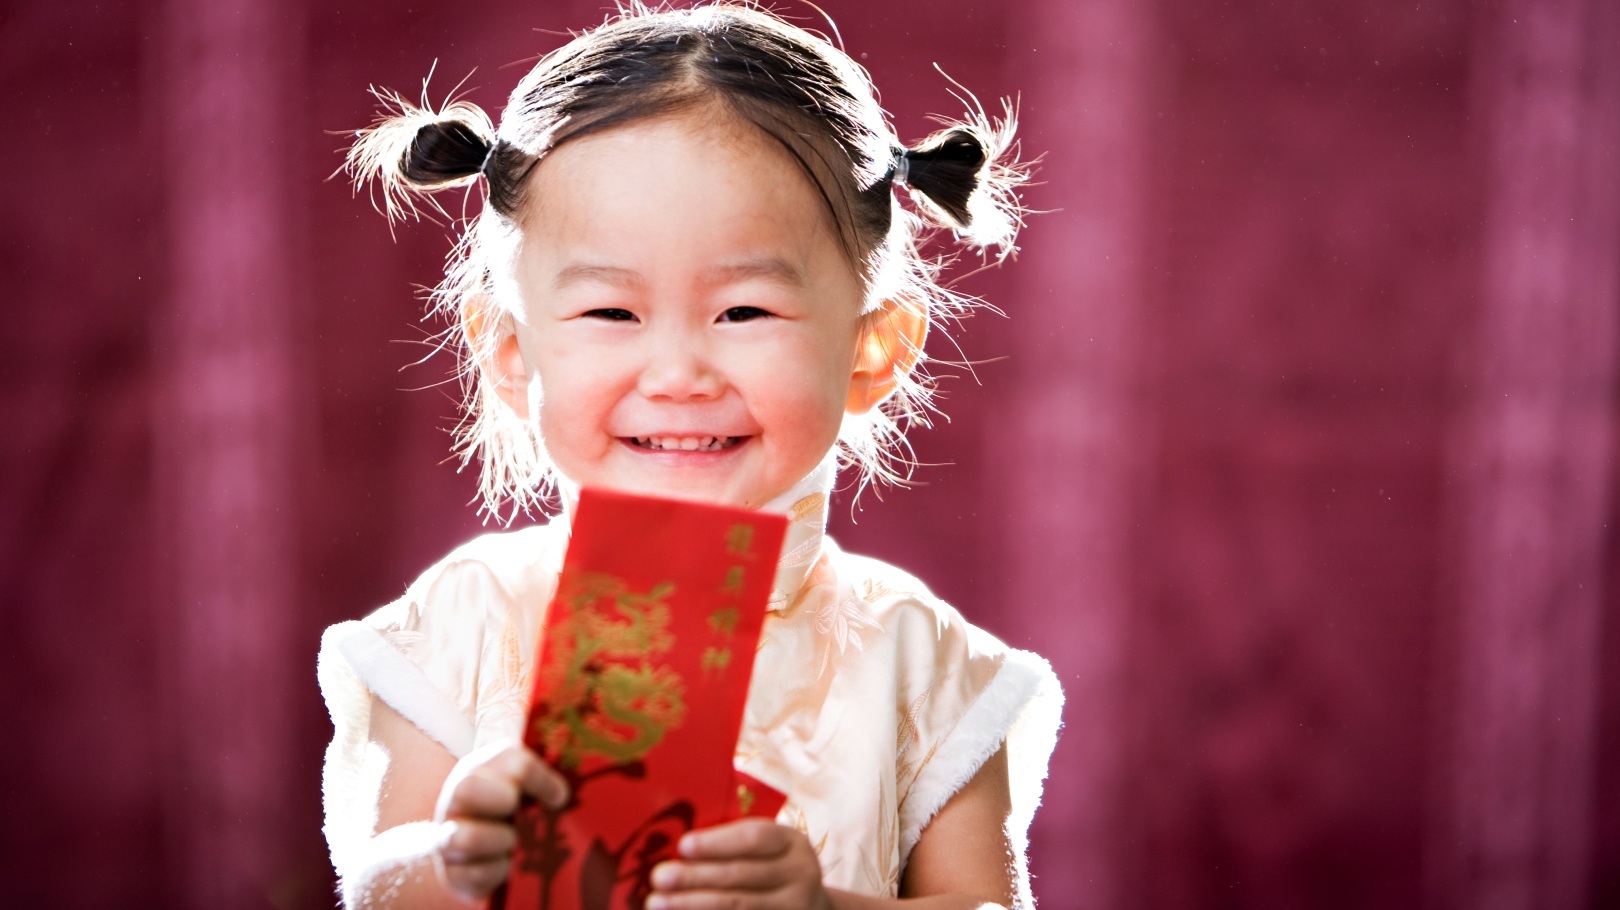 Want to usher in this Lunar New Year feeling prosperous rather than penniless? Read this before starting your festive preparations.
